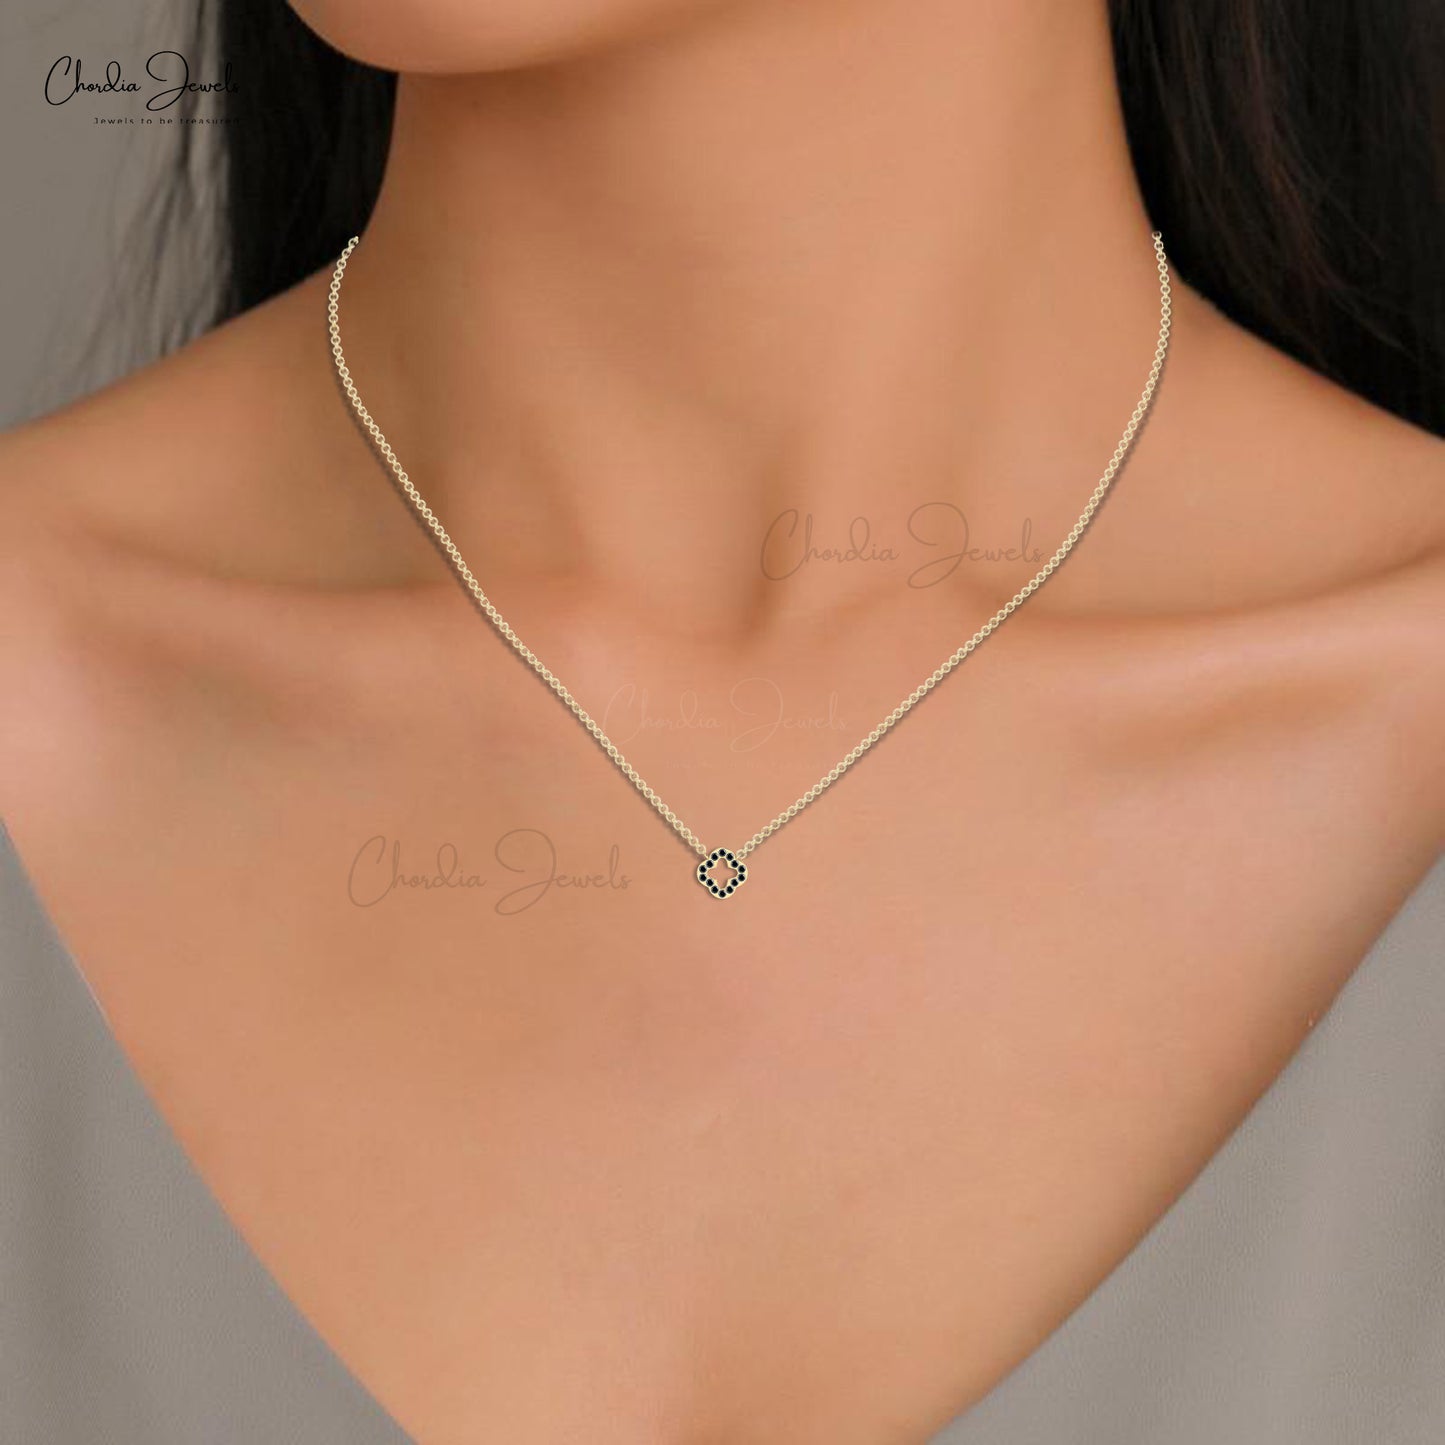 Premium Quality Unique Design Stylish Charms Necklace Pendant in 14k Real Gold Genuine Black Diamond Open Clover Necklace Engagement Gift